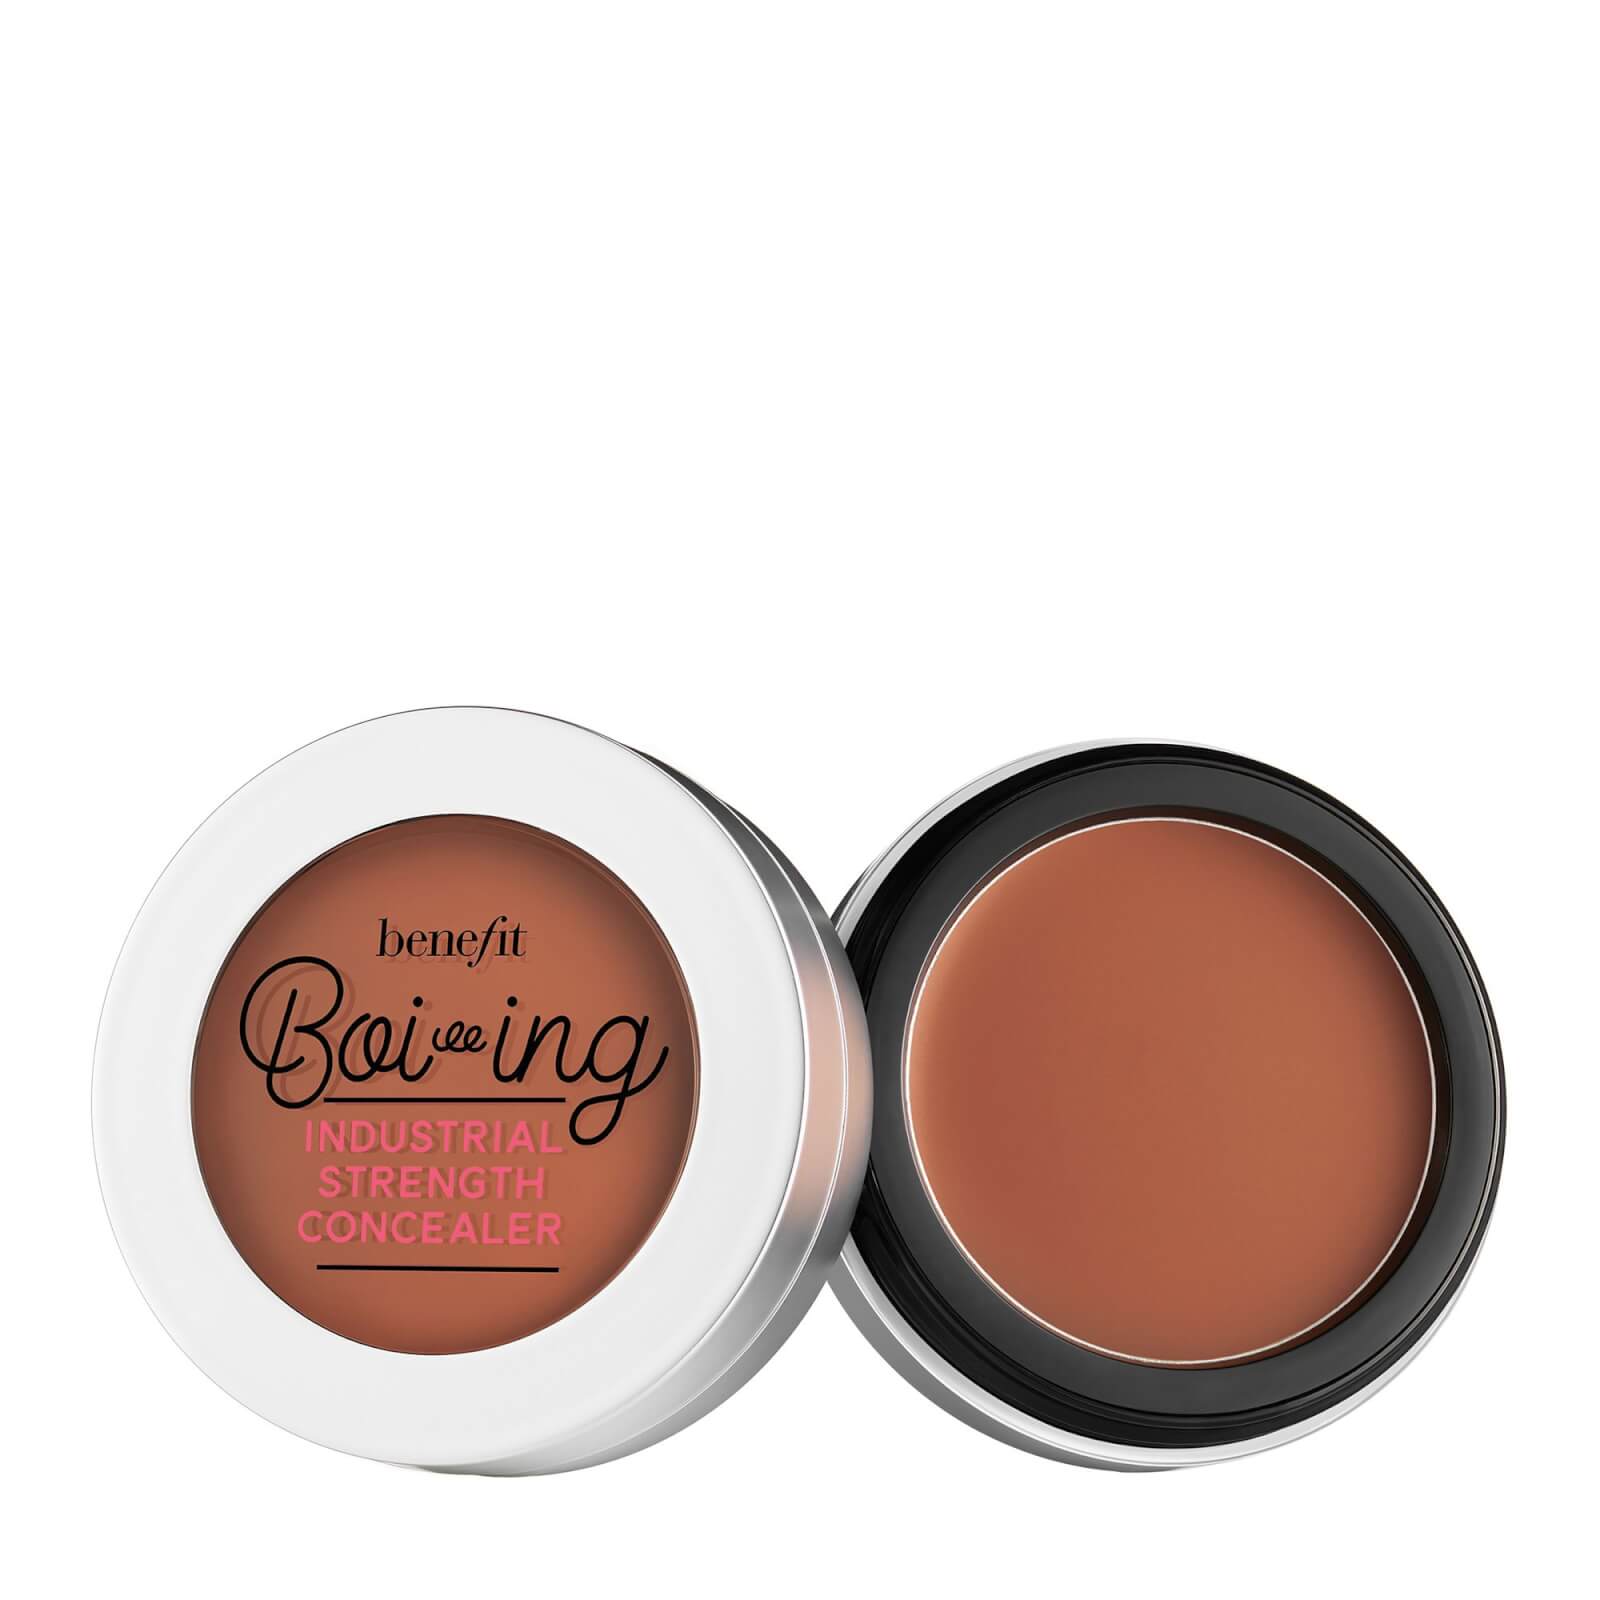 benefit Boi-ing Industrial Strength Concealer 3g (Various Shades) - 06